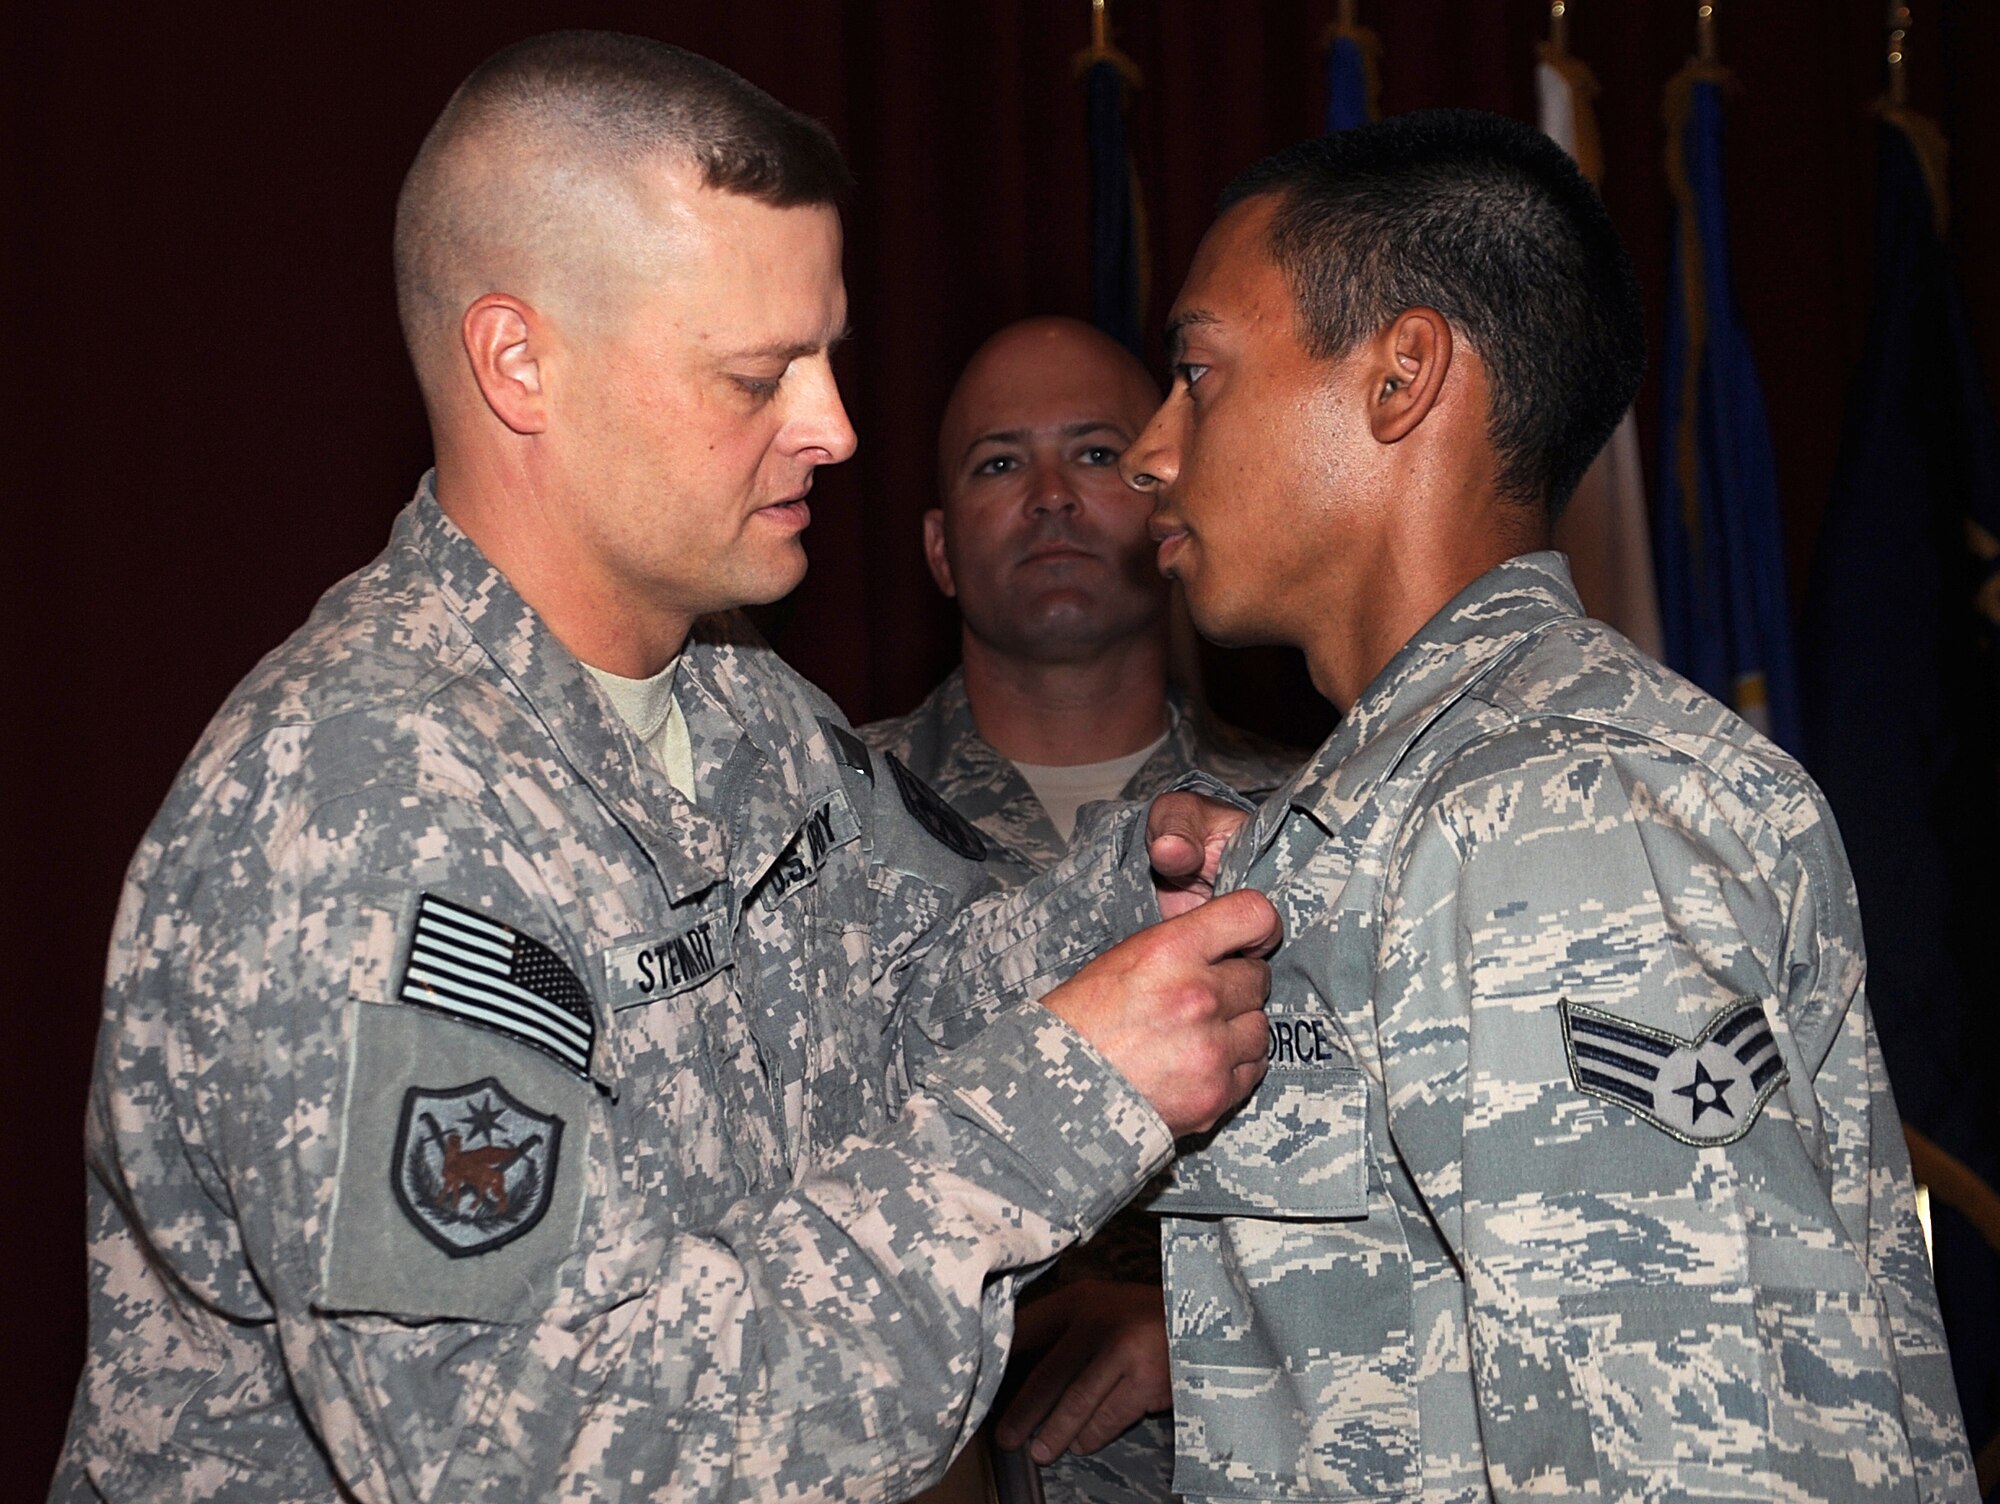 Senior Airman Kenny Gonzalez receives the U.S. Army Combat Action Badge during an official ceremony in Southwest Asia June 9. Airman Gonzalez is a combat trucker with the 387th Expeditionary Logistics Readiness Squadron. Airman Gonzalez's vehicle was struck by an improvised explosive device while on a convoy in Iraq as part of the Joint Logistics Task Force 6, 70th Medium Truck Detachment in direct support of Operations New Dawn and Iraqi Freedom. (U.S. Air Force photo by Senior Airman Cynthia Spalding)